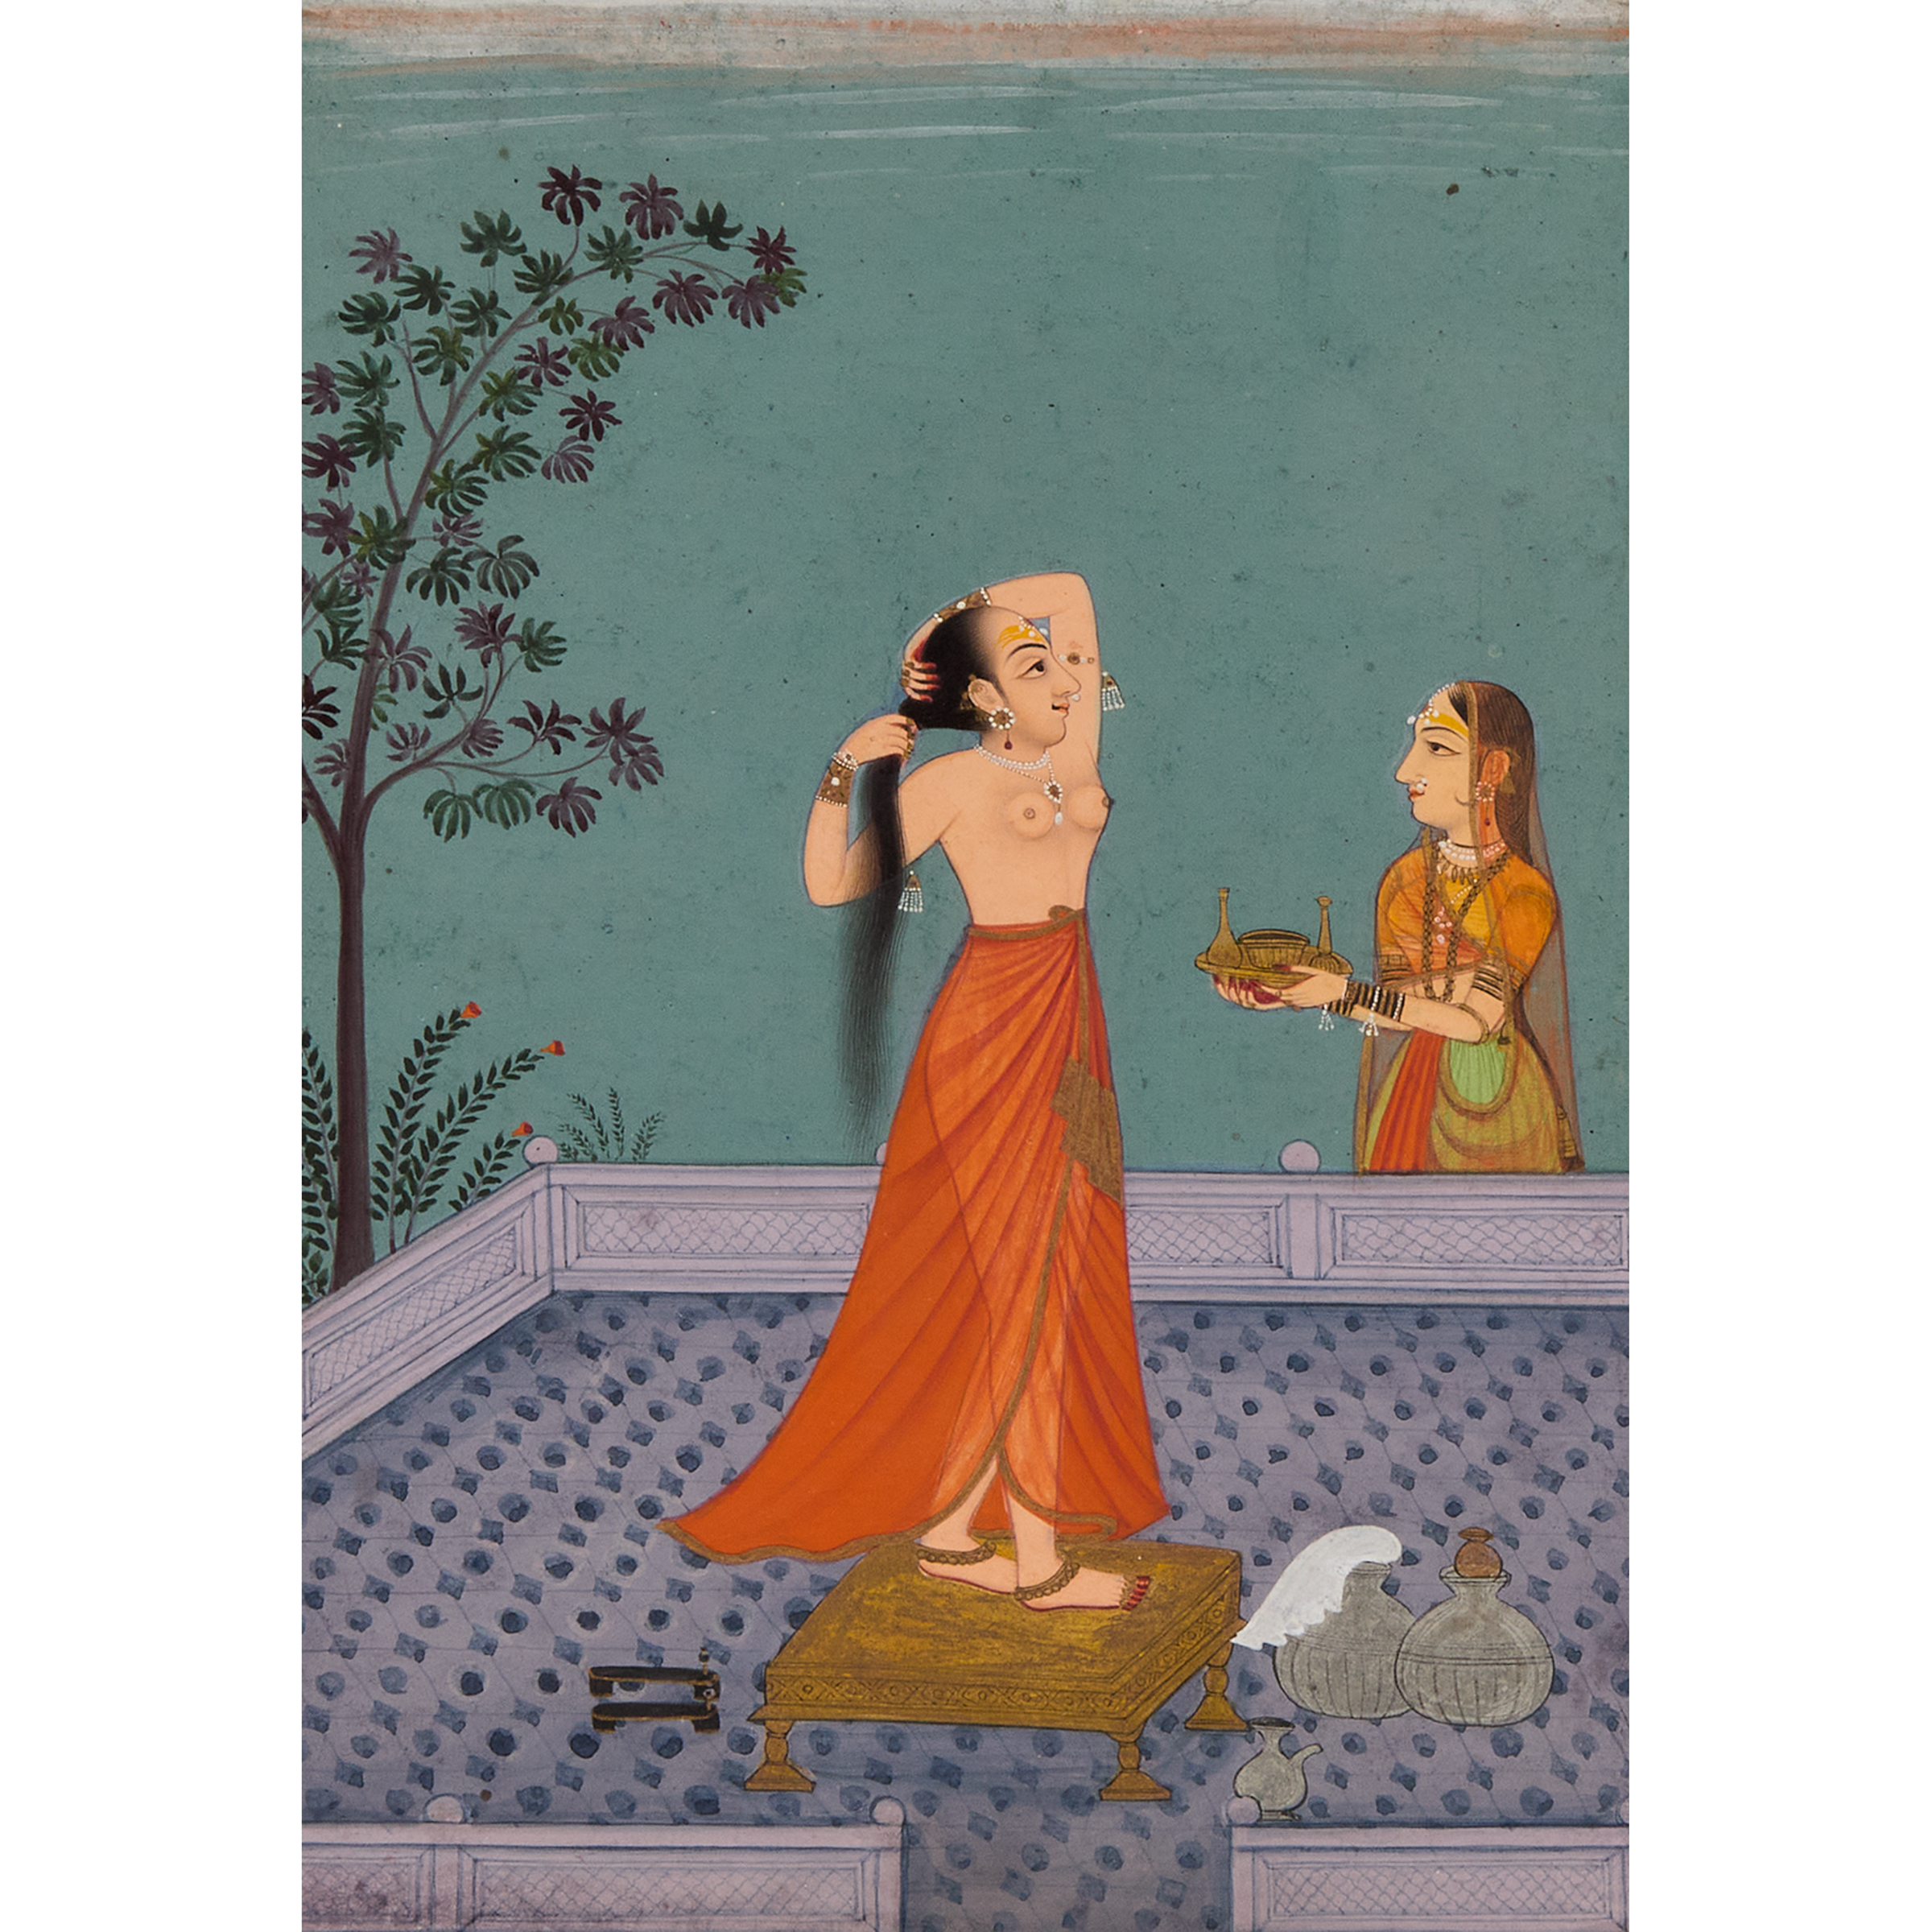 A Painting of a Woman Bathing on a Veranda,